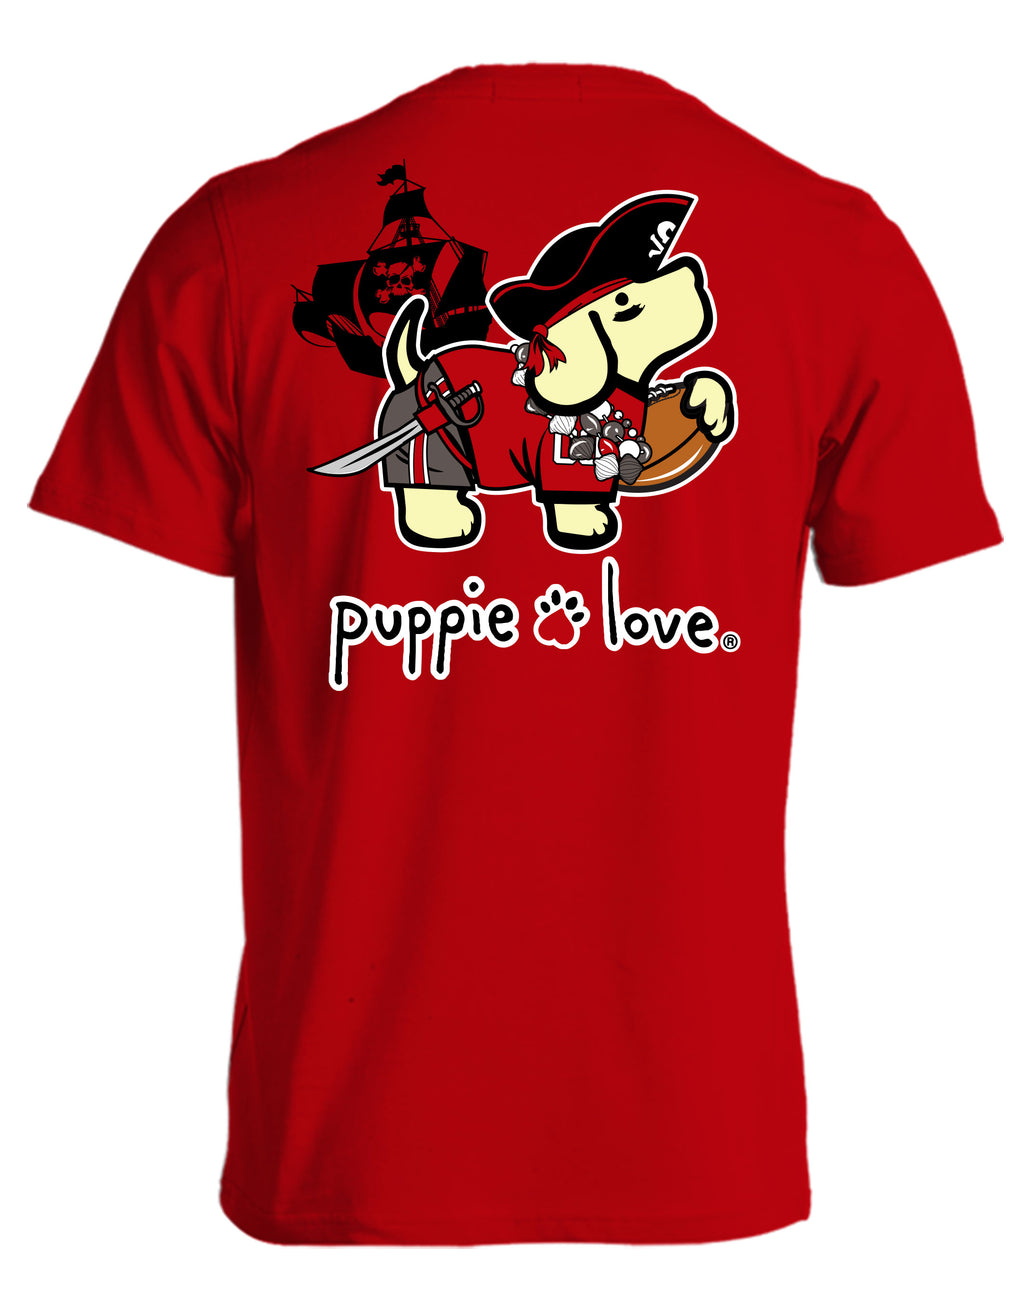 RED AND BLACK MASCOT PUP - Puppie Love